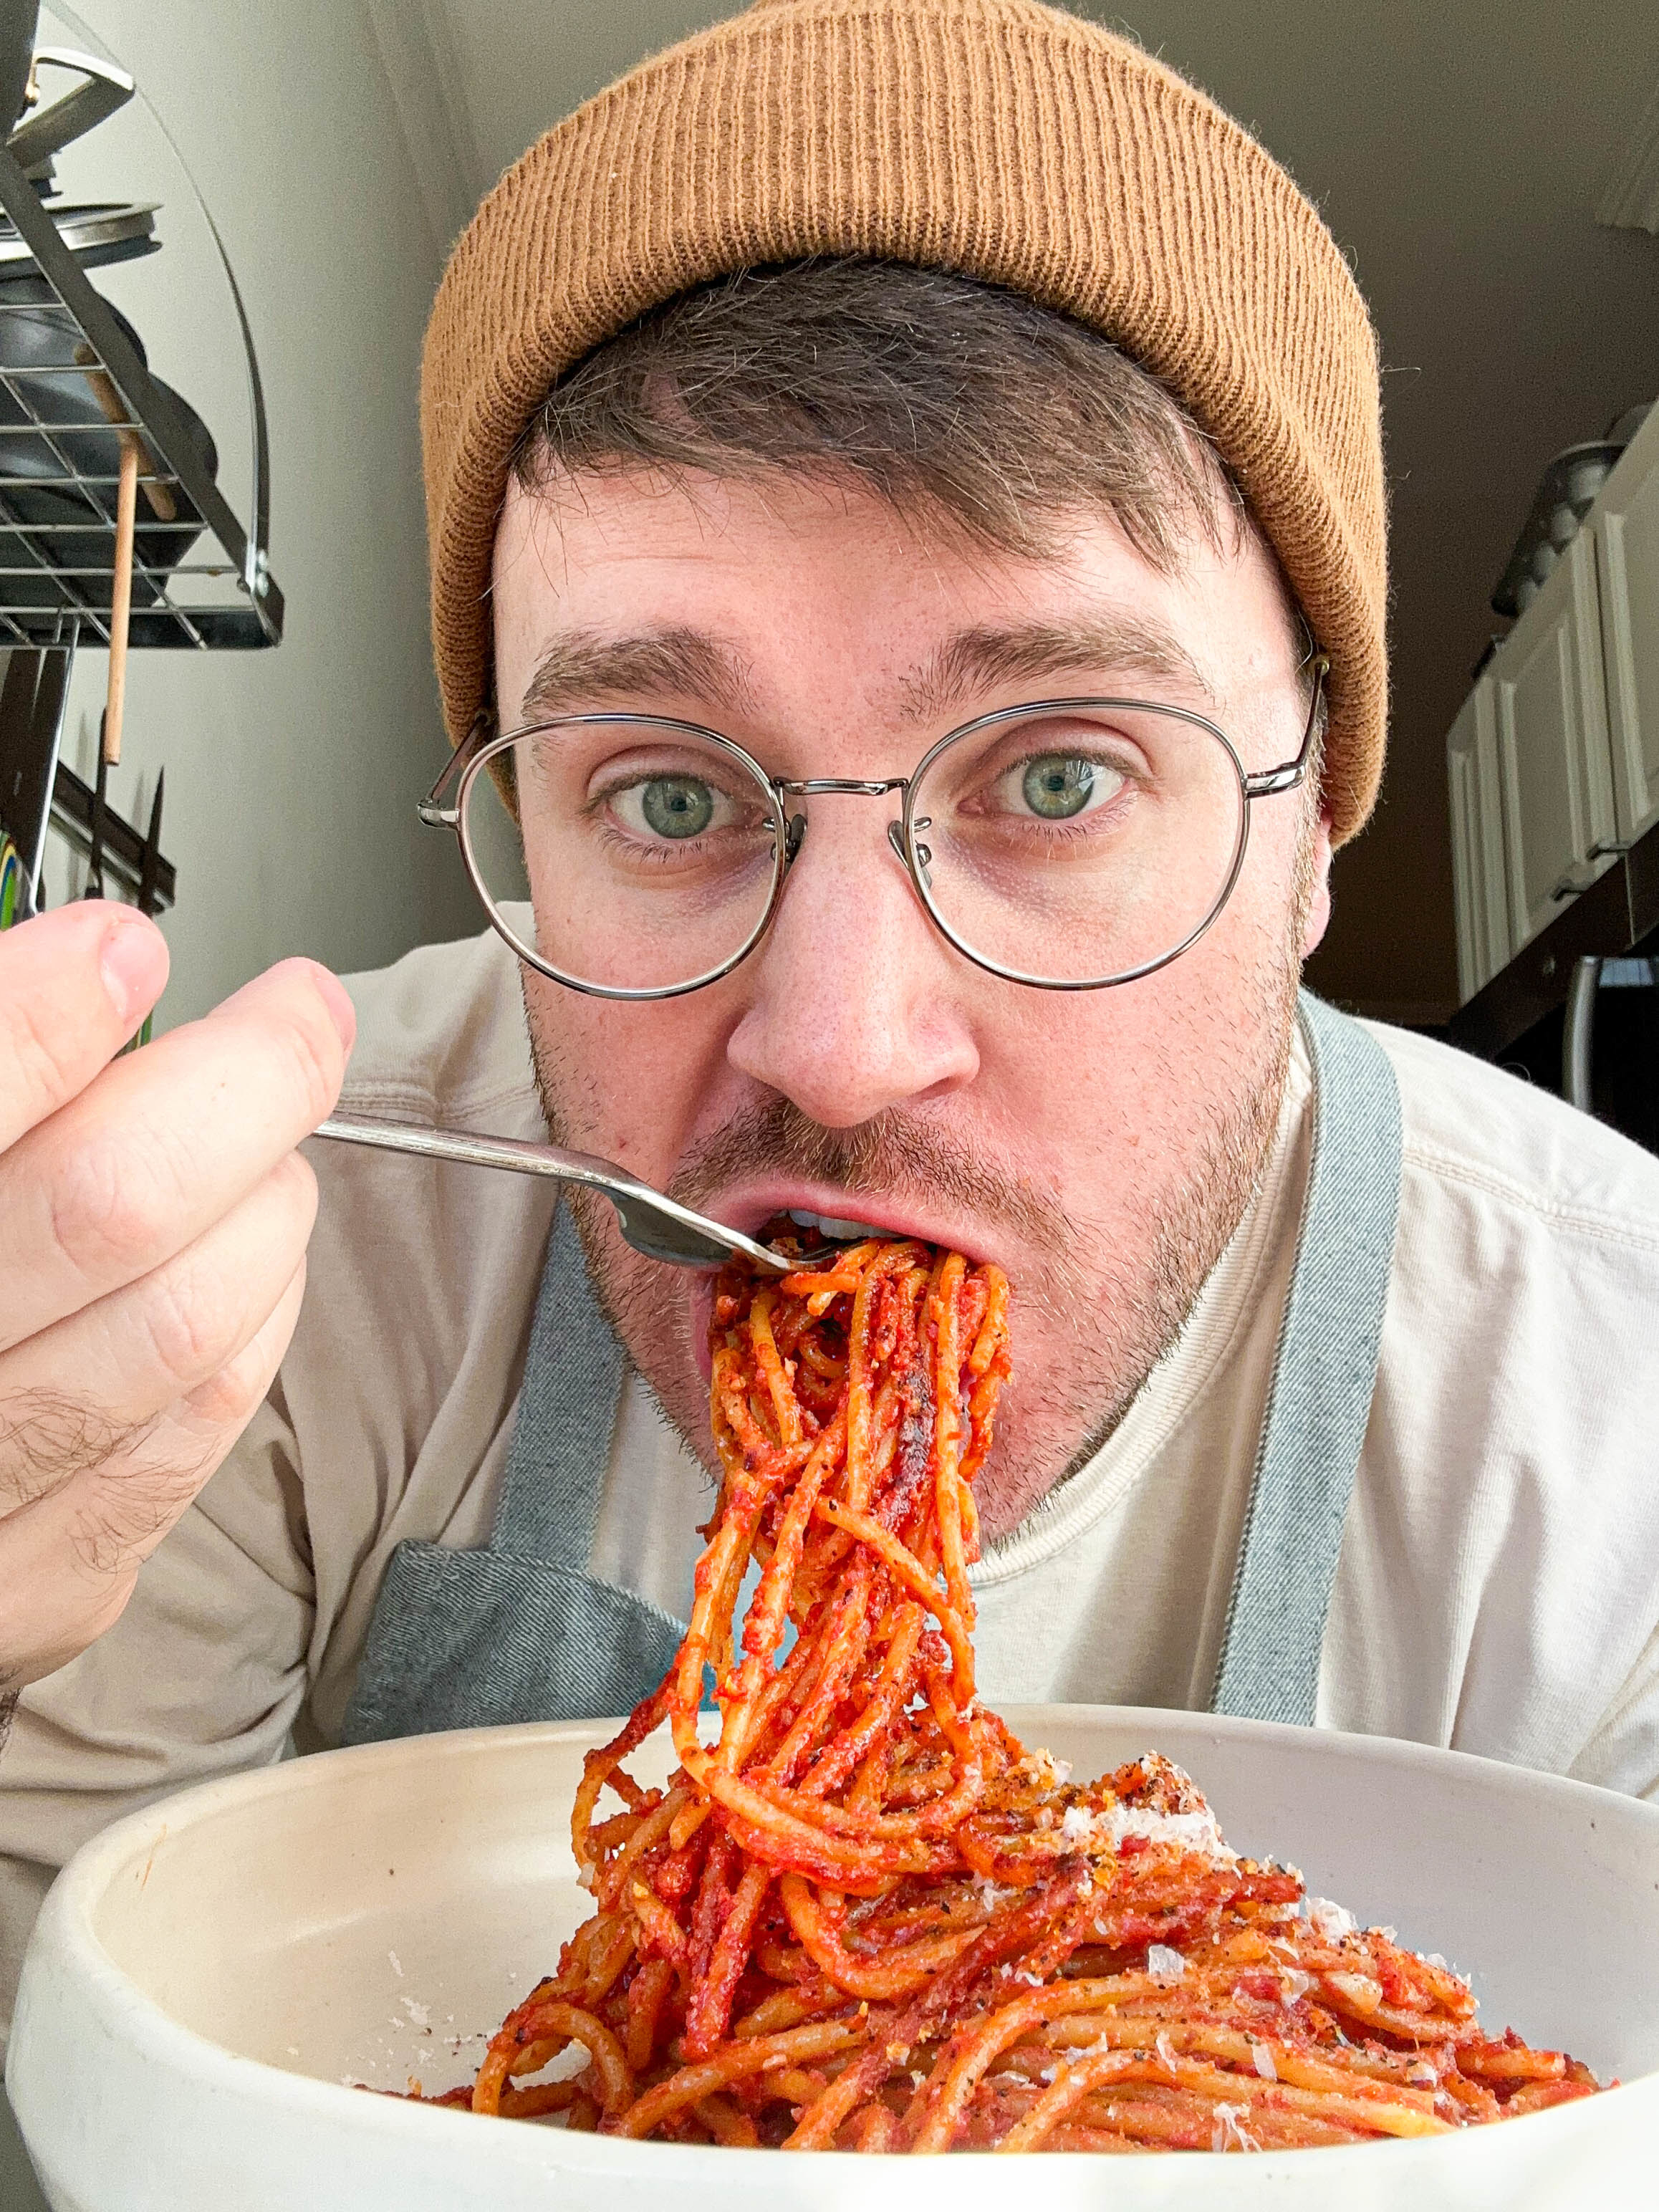 Man with glasses and beanie eating spaghetti, looking at camera